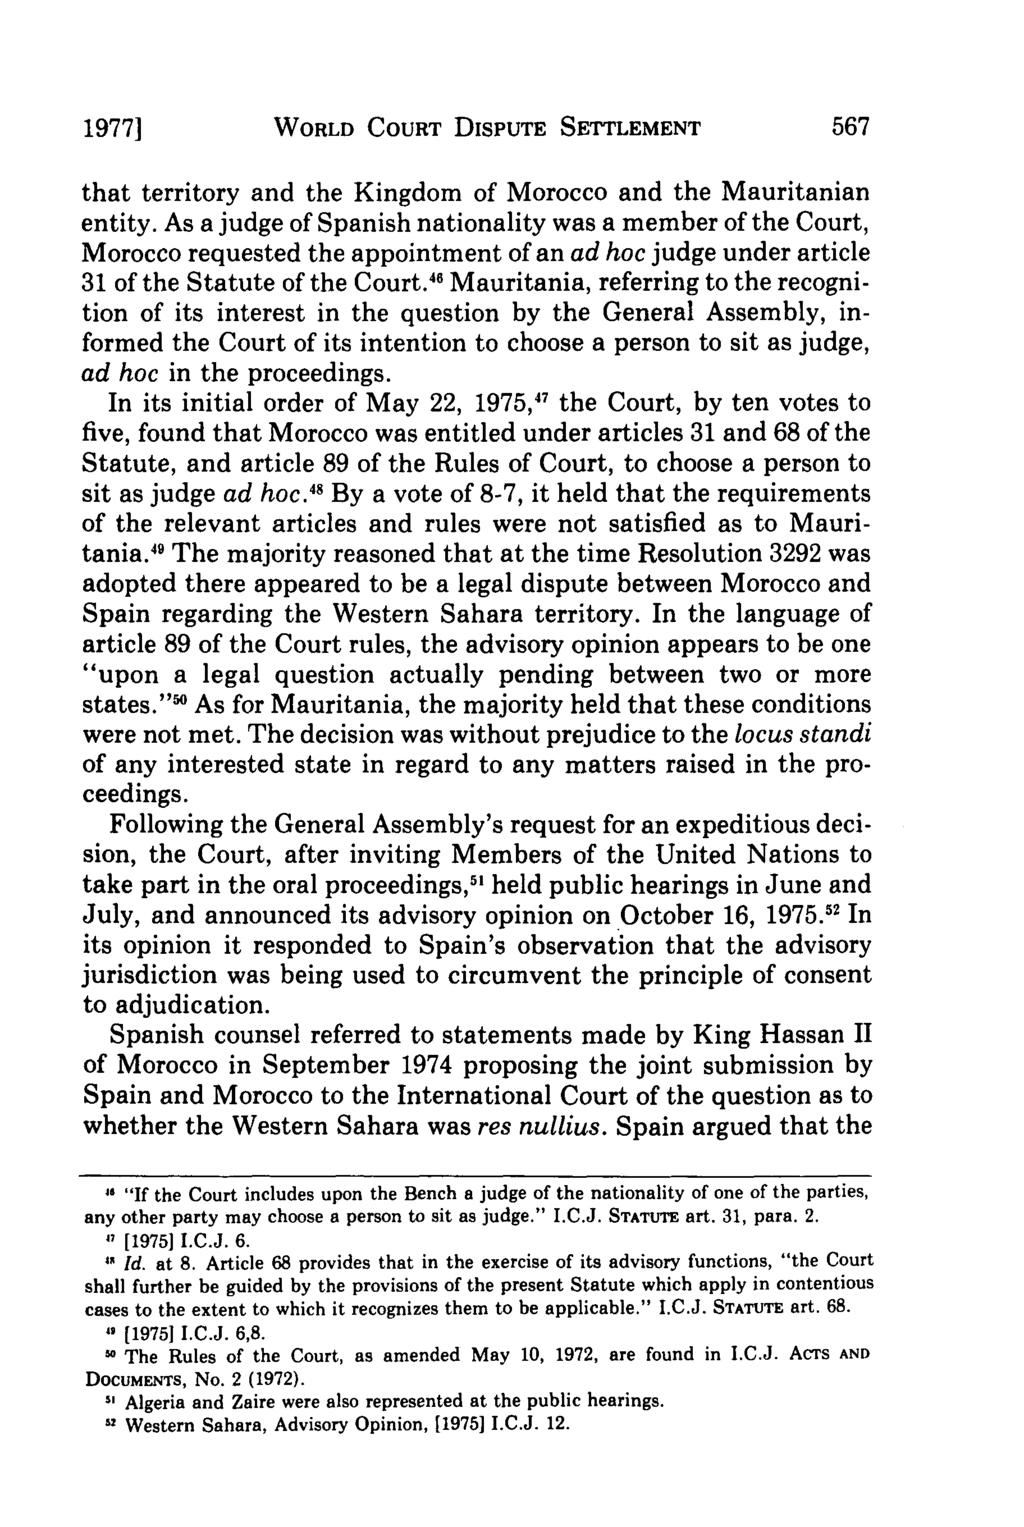 19771 WORLD COURT DISPUTE SETTLEMENT that territory and the Kingdom of Morocco and the Mauritanian entity.